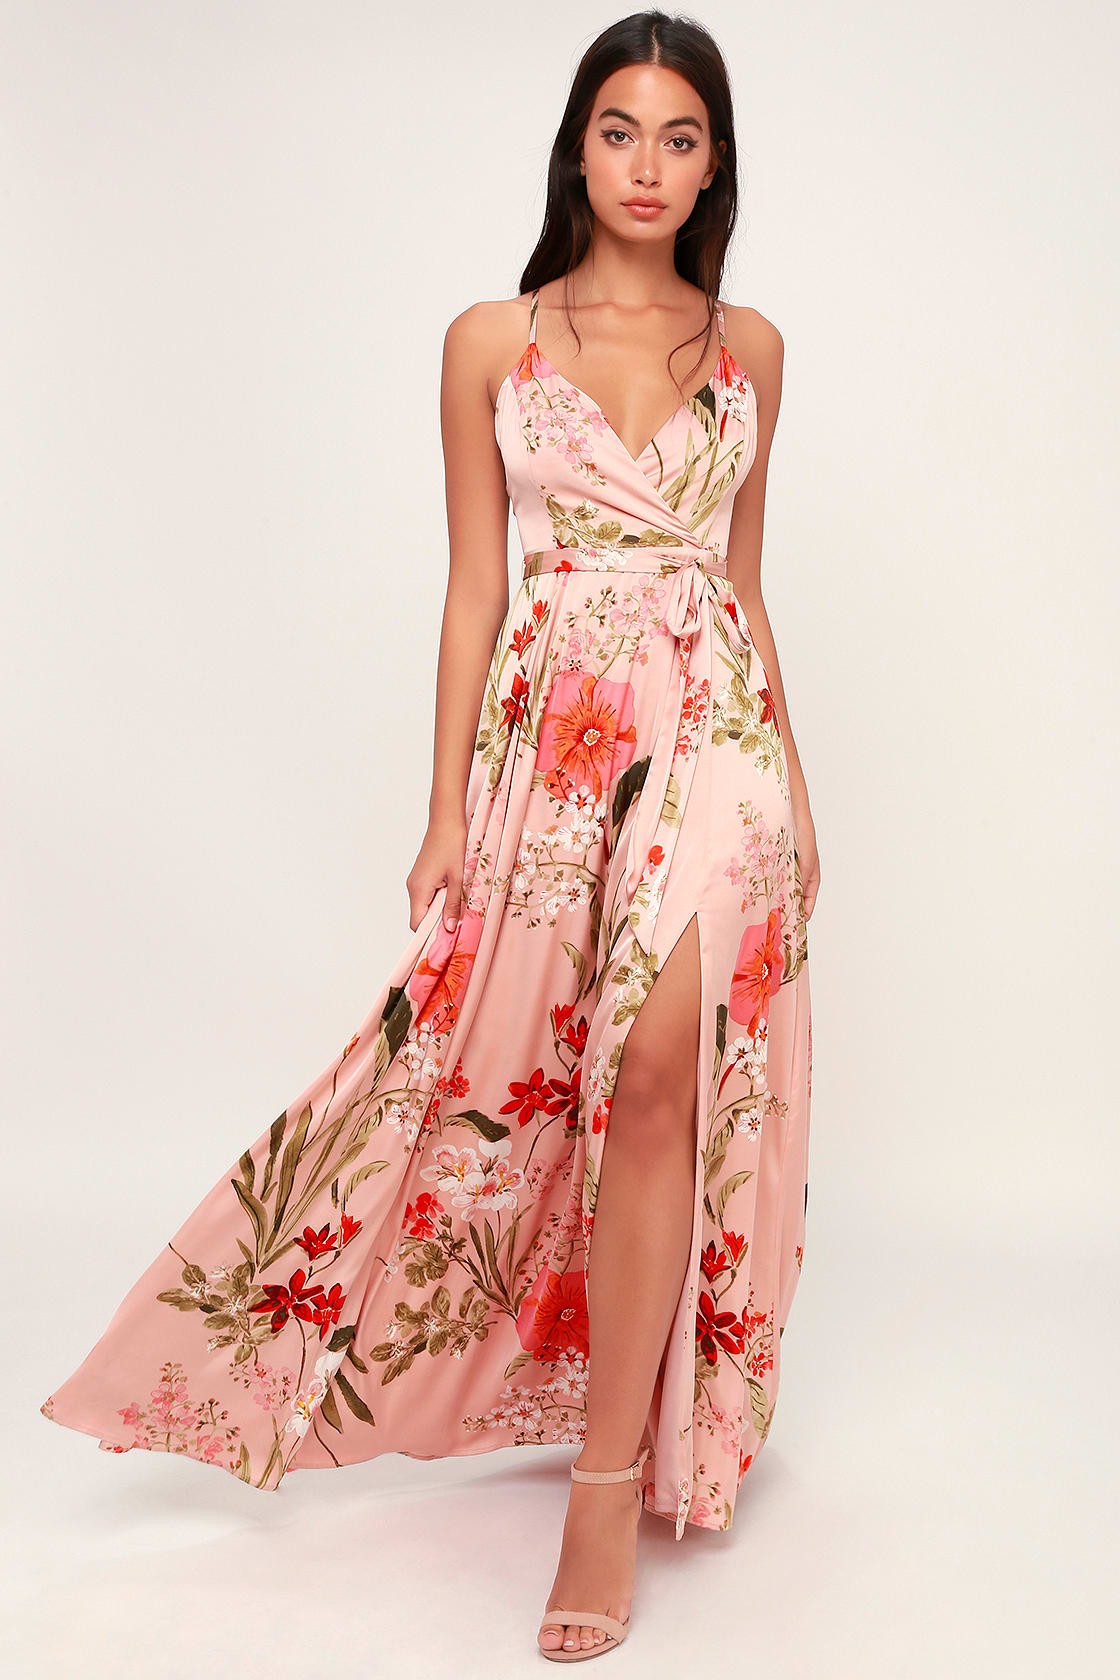 pink dresses to wear to a wedding